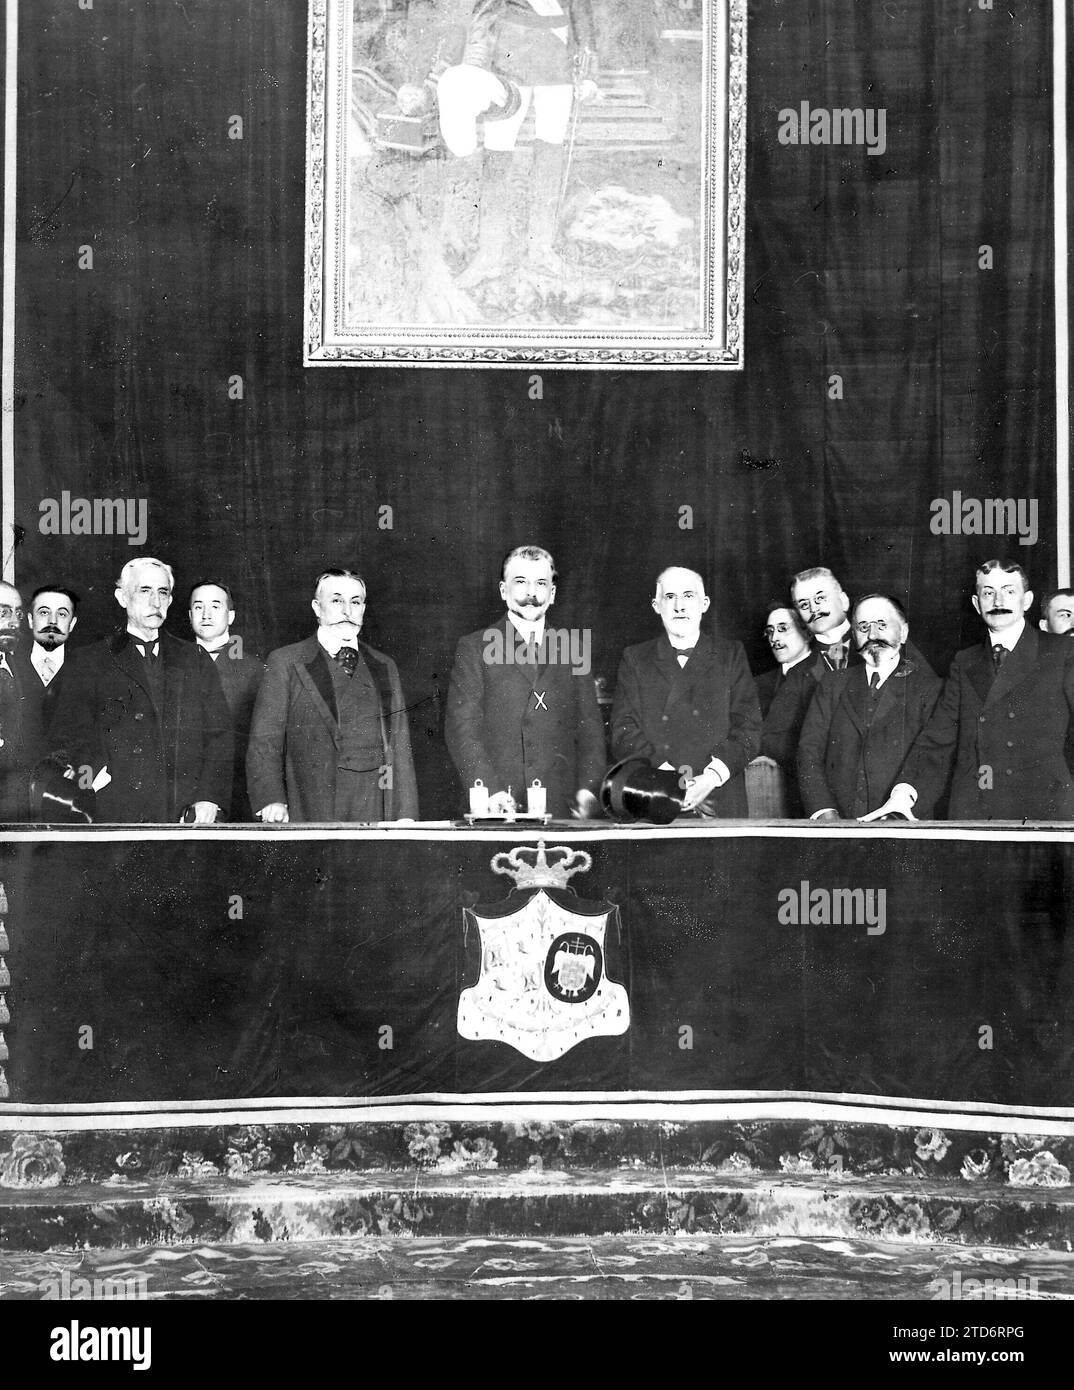 04/18/1911. Yesterday's solemnity in Madrid. The Minister of Public Instruction (X) in the presidency of the opening ceremony of the French Institute course, Verified yesterday afternoon in the auditorium of the Central University. Credit: Album / Archivo ABC / Rivero Stock Photo